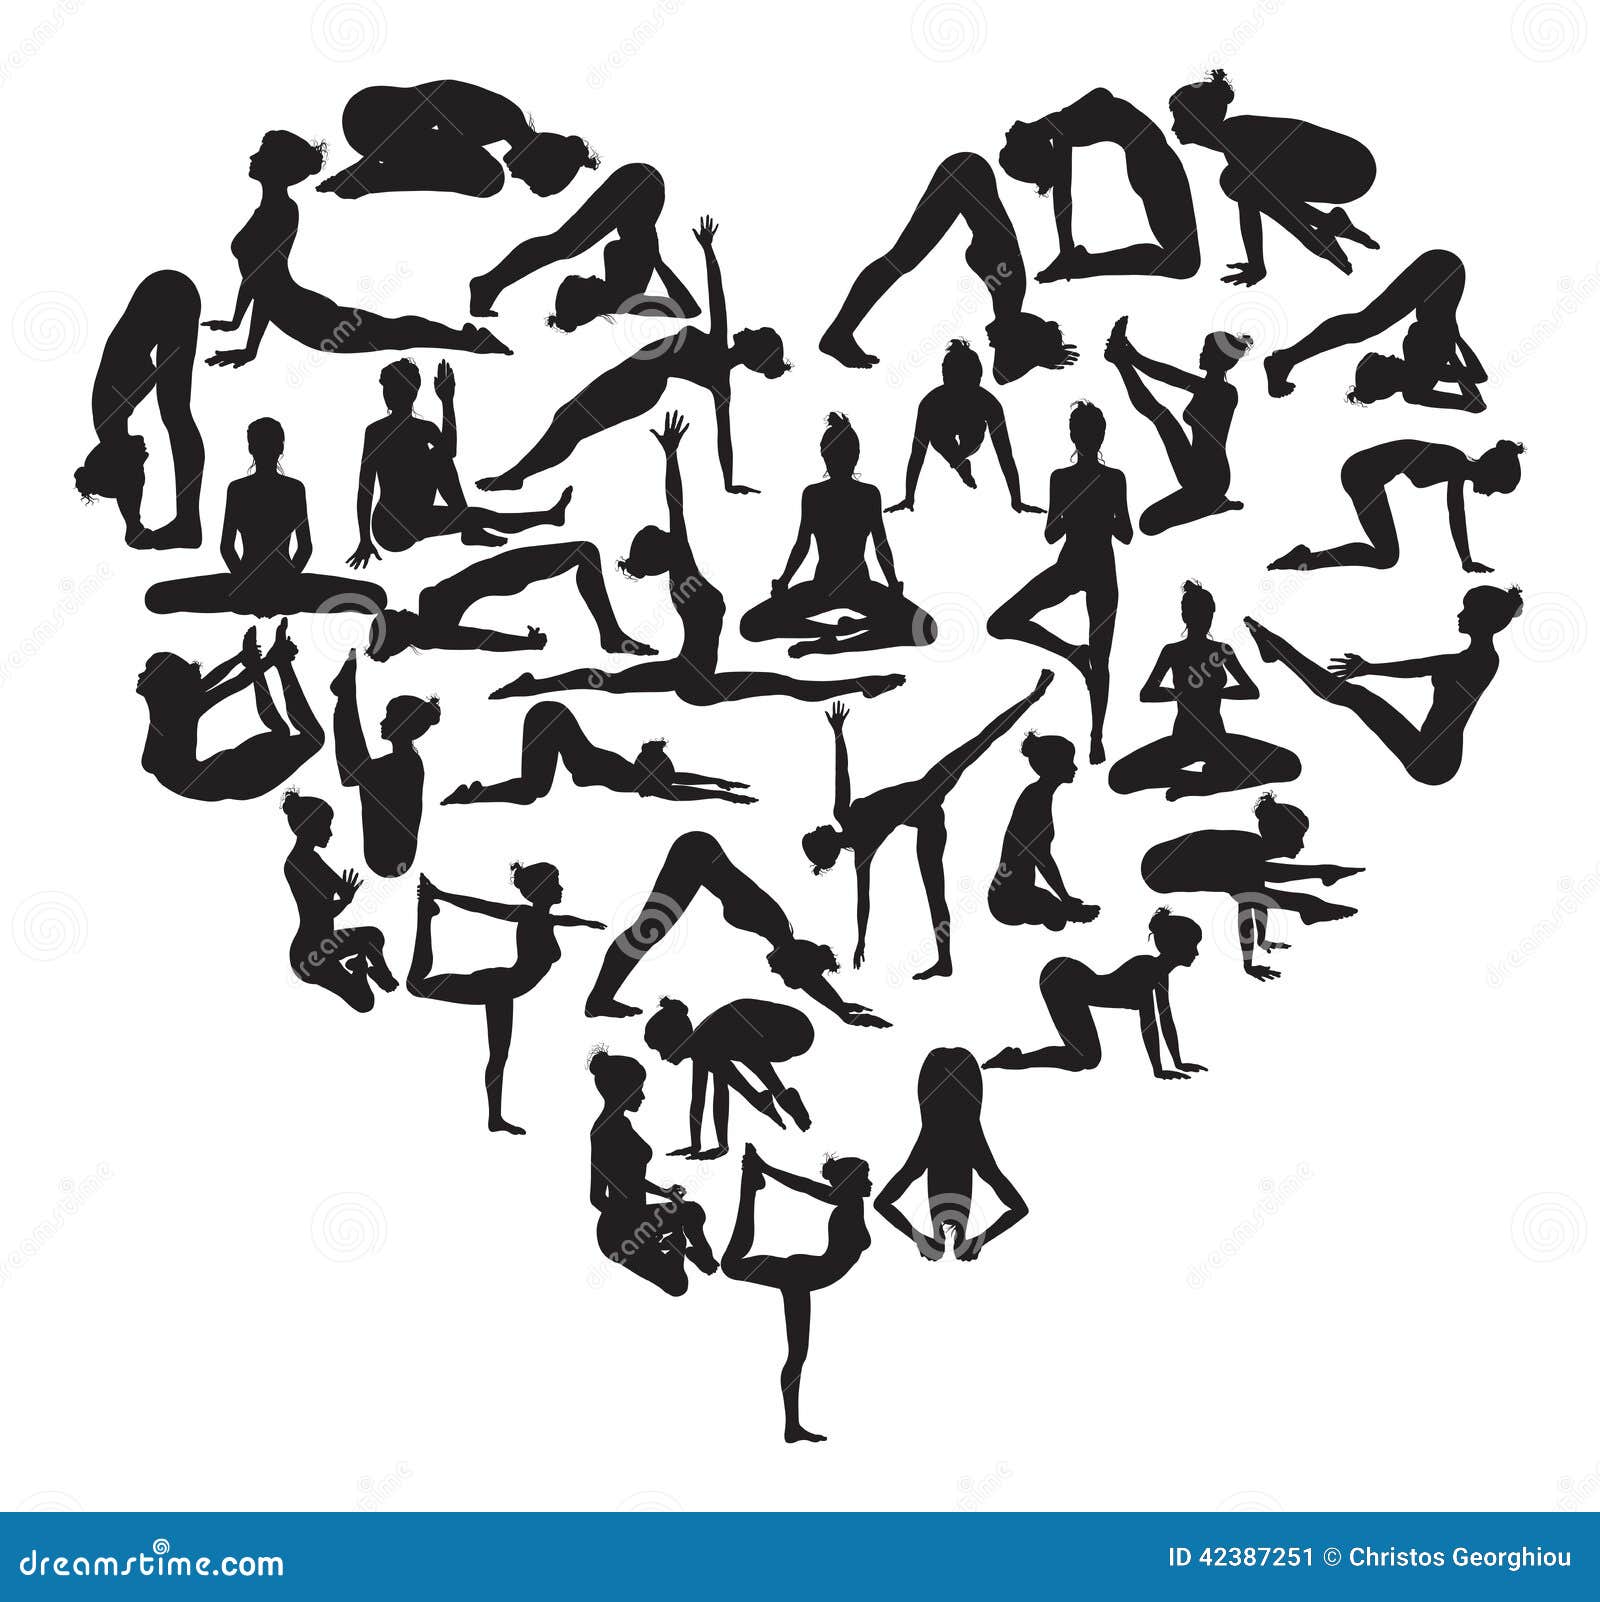 a heart from made  poses. silhouettes in z shape yoga yoga poses or pilates